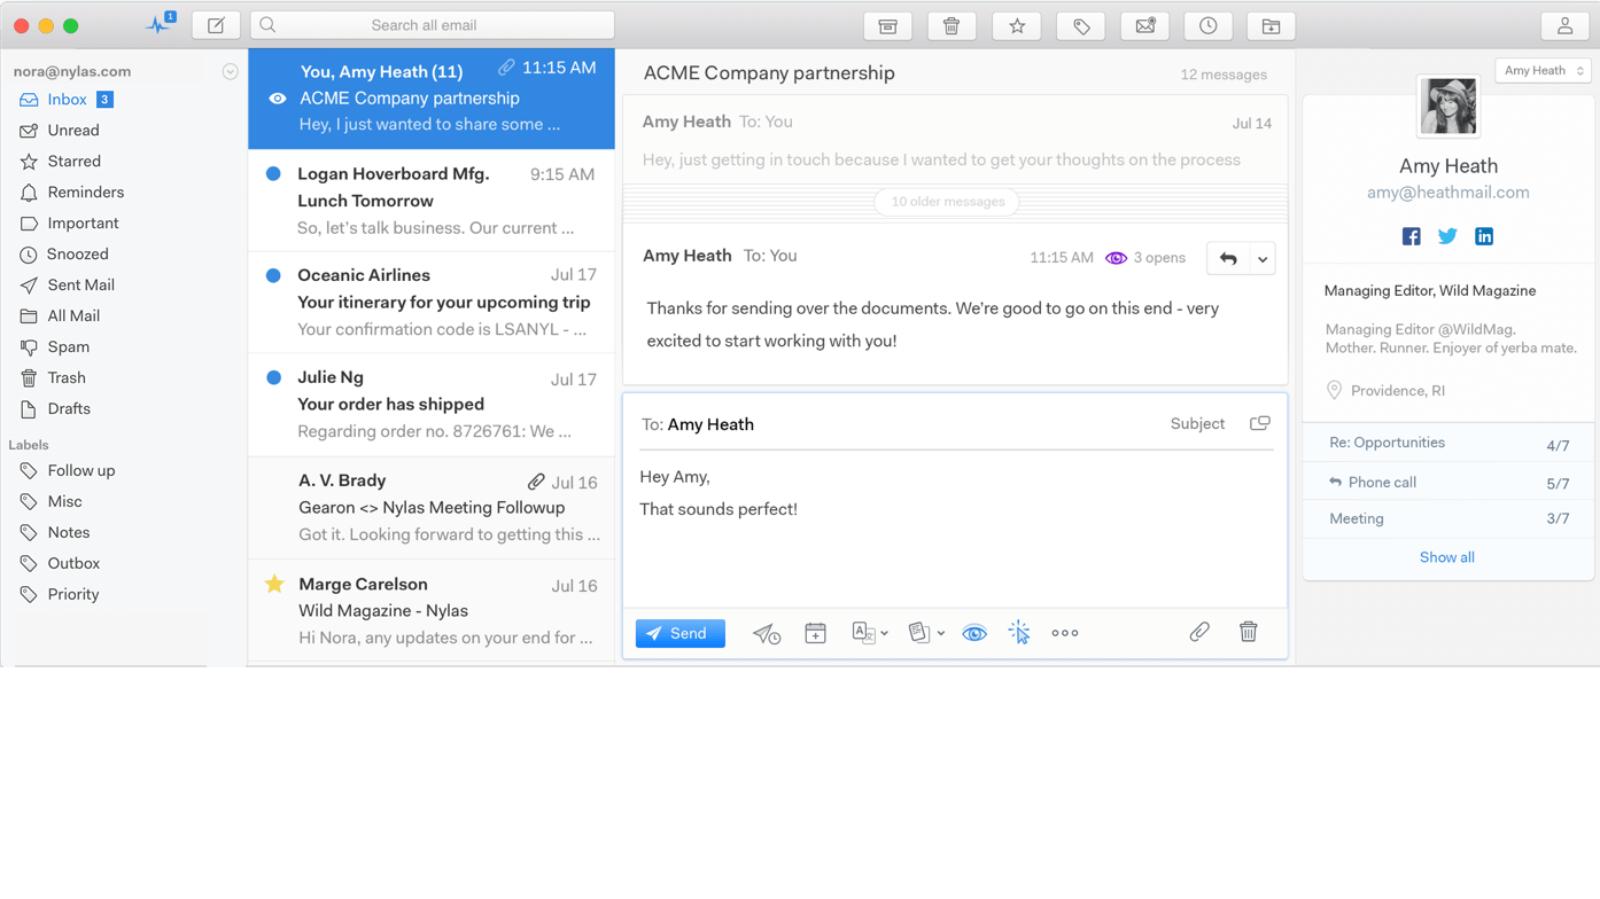 best email clients macos